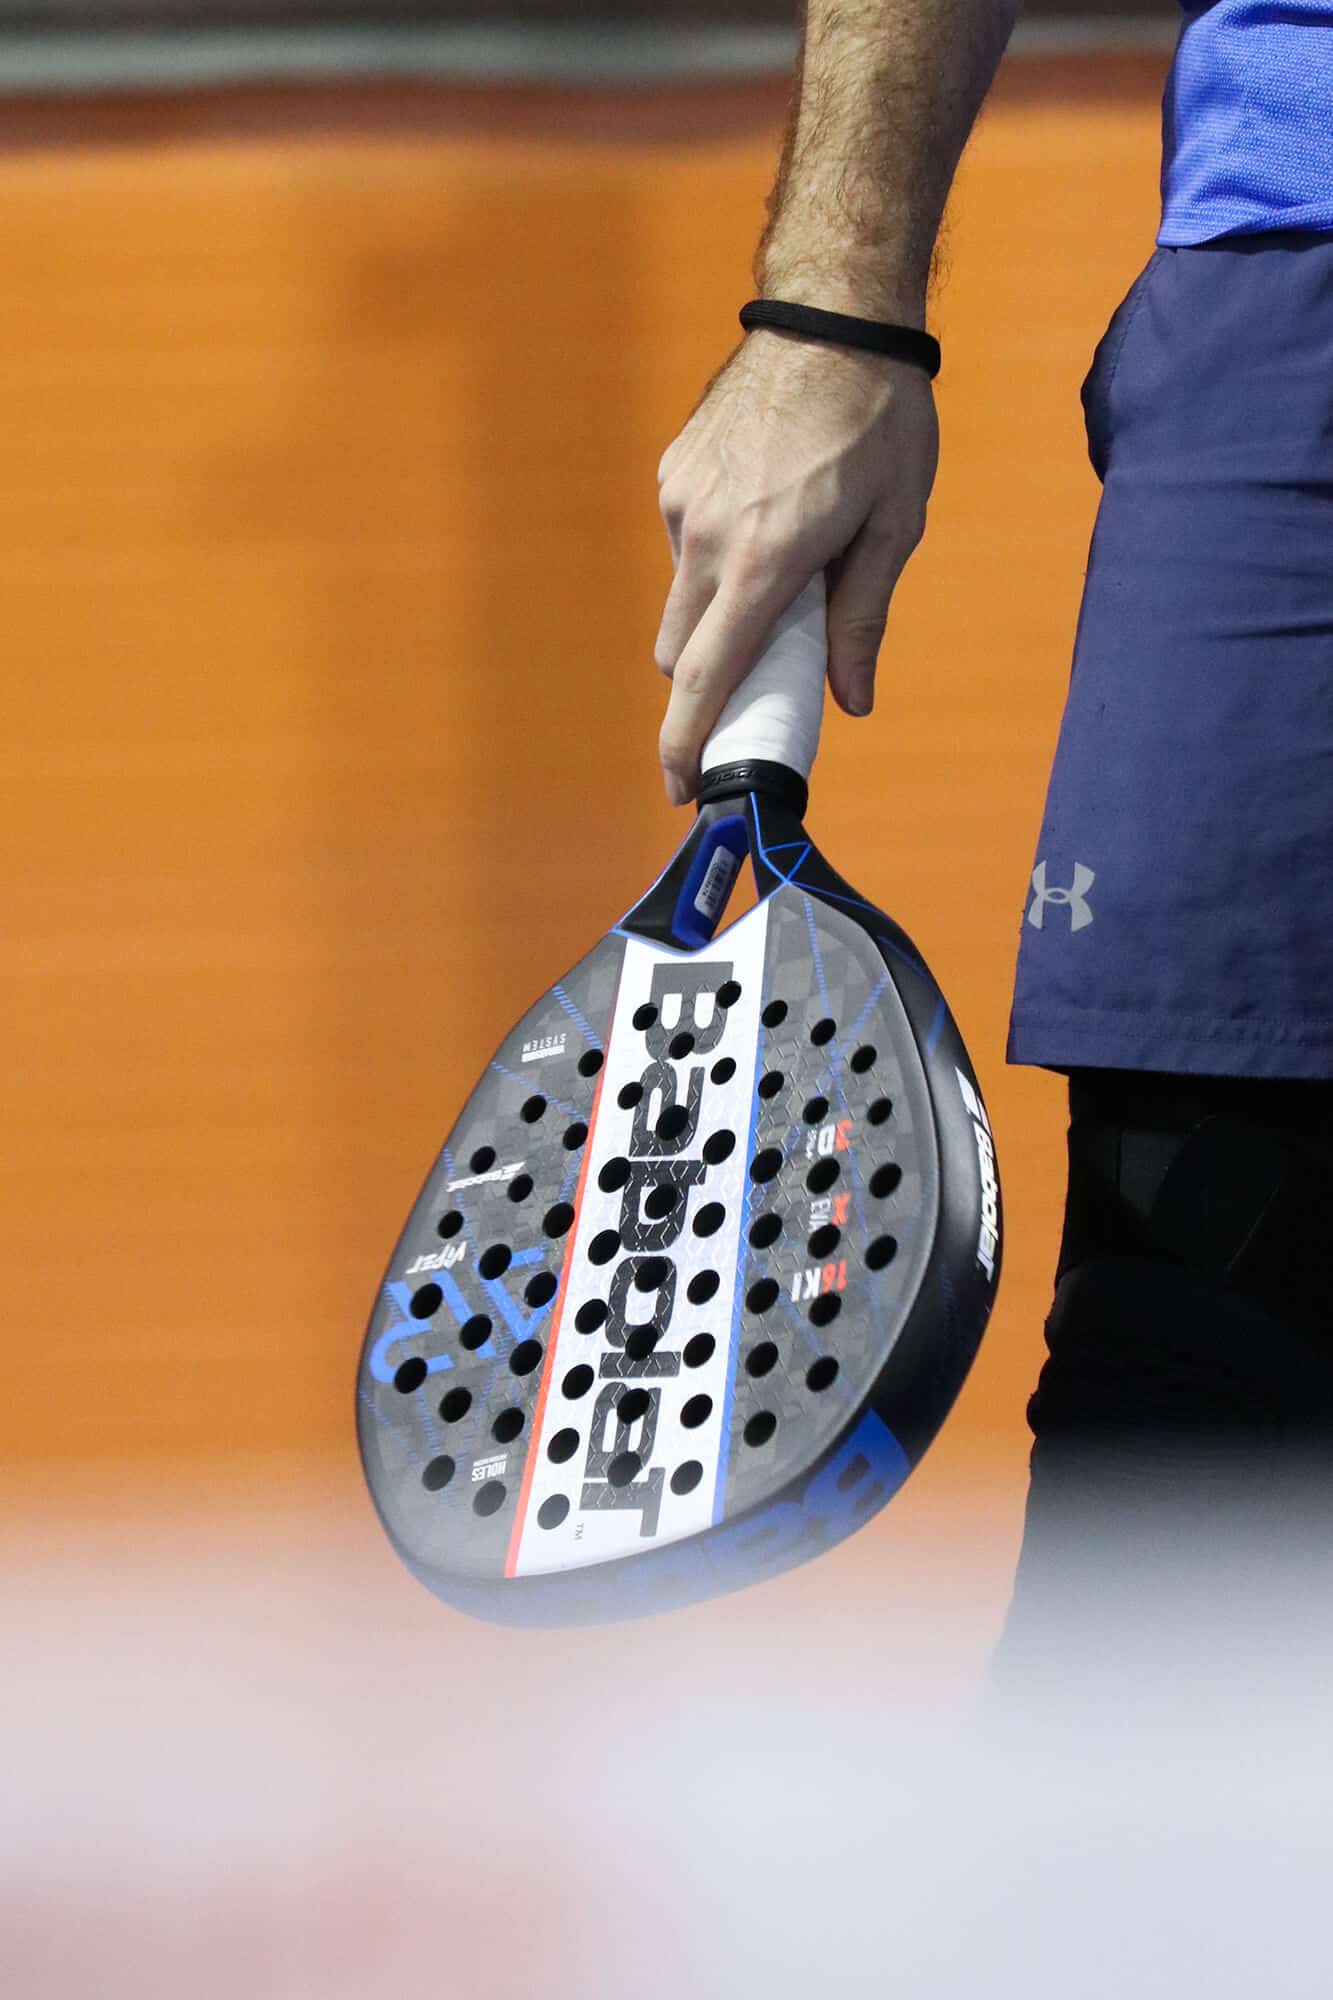 Padel free images - player with a racket